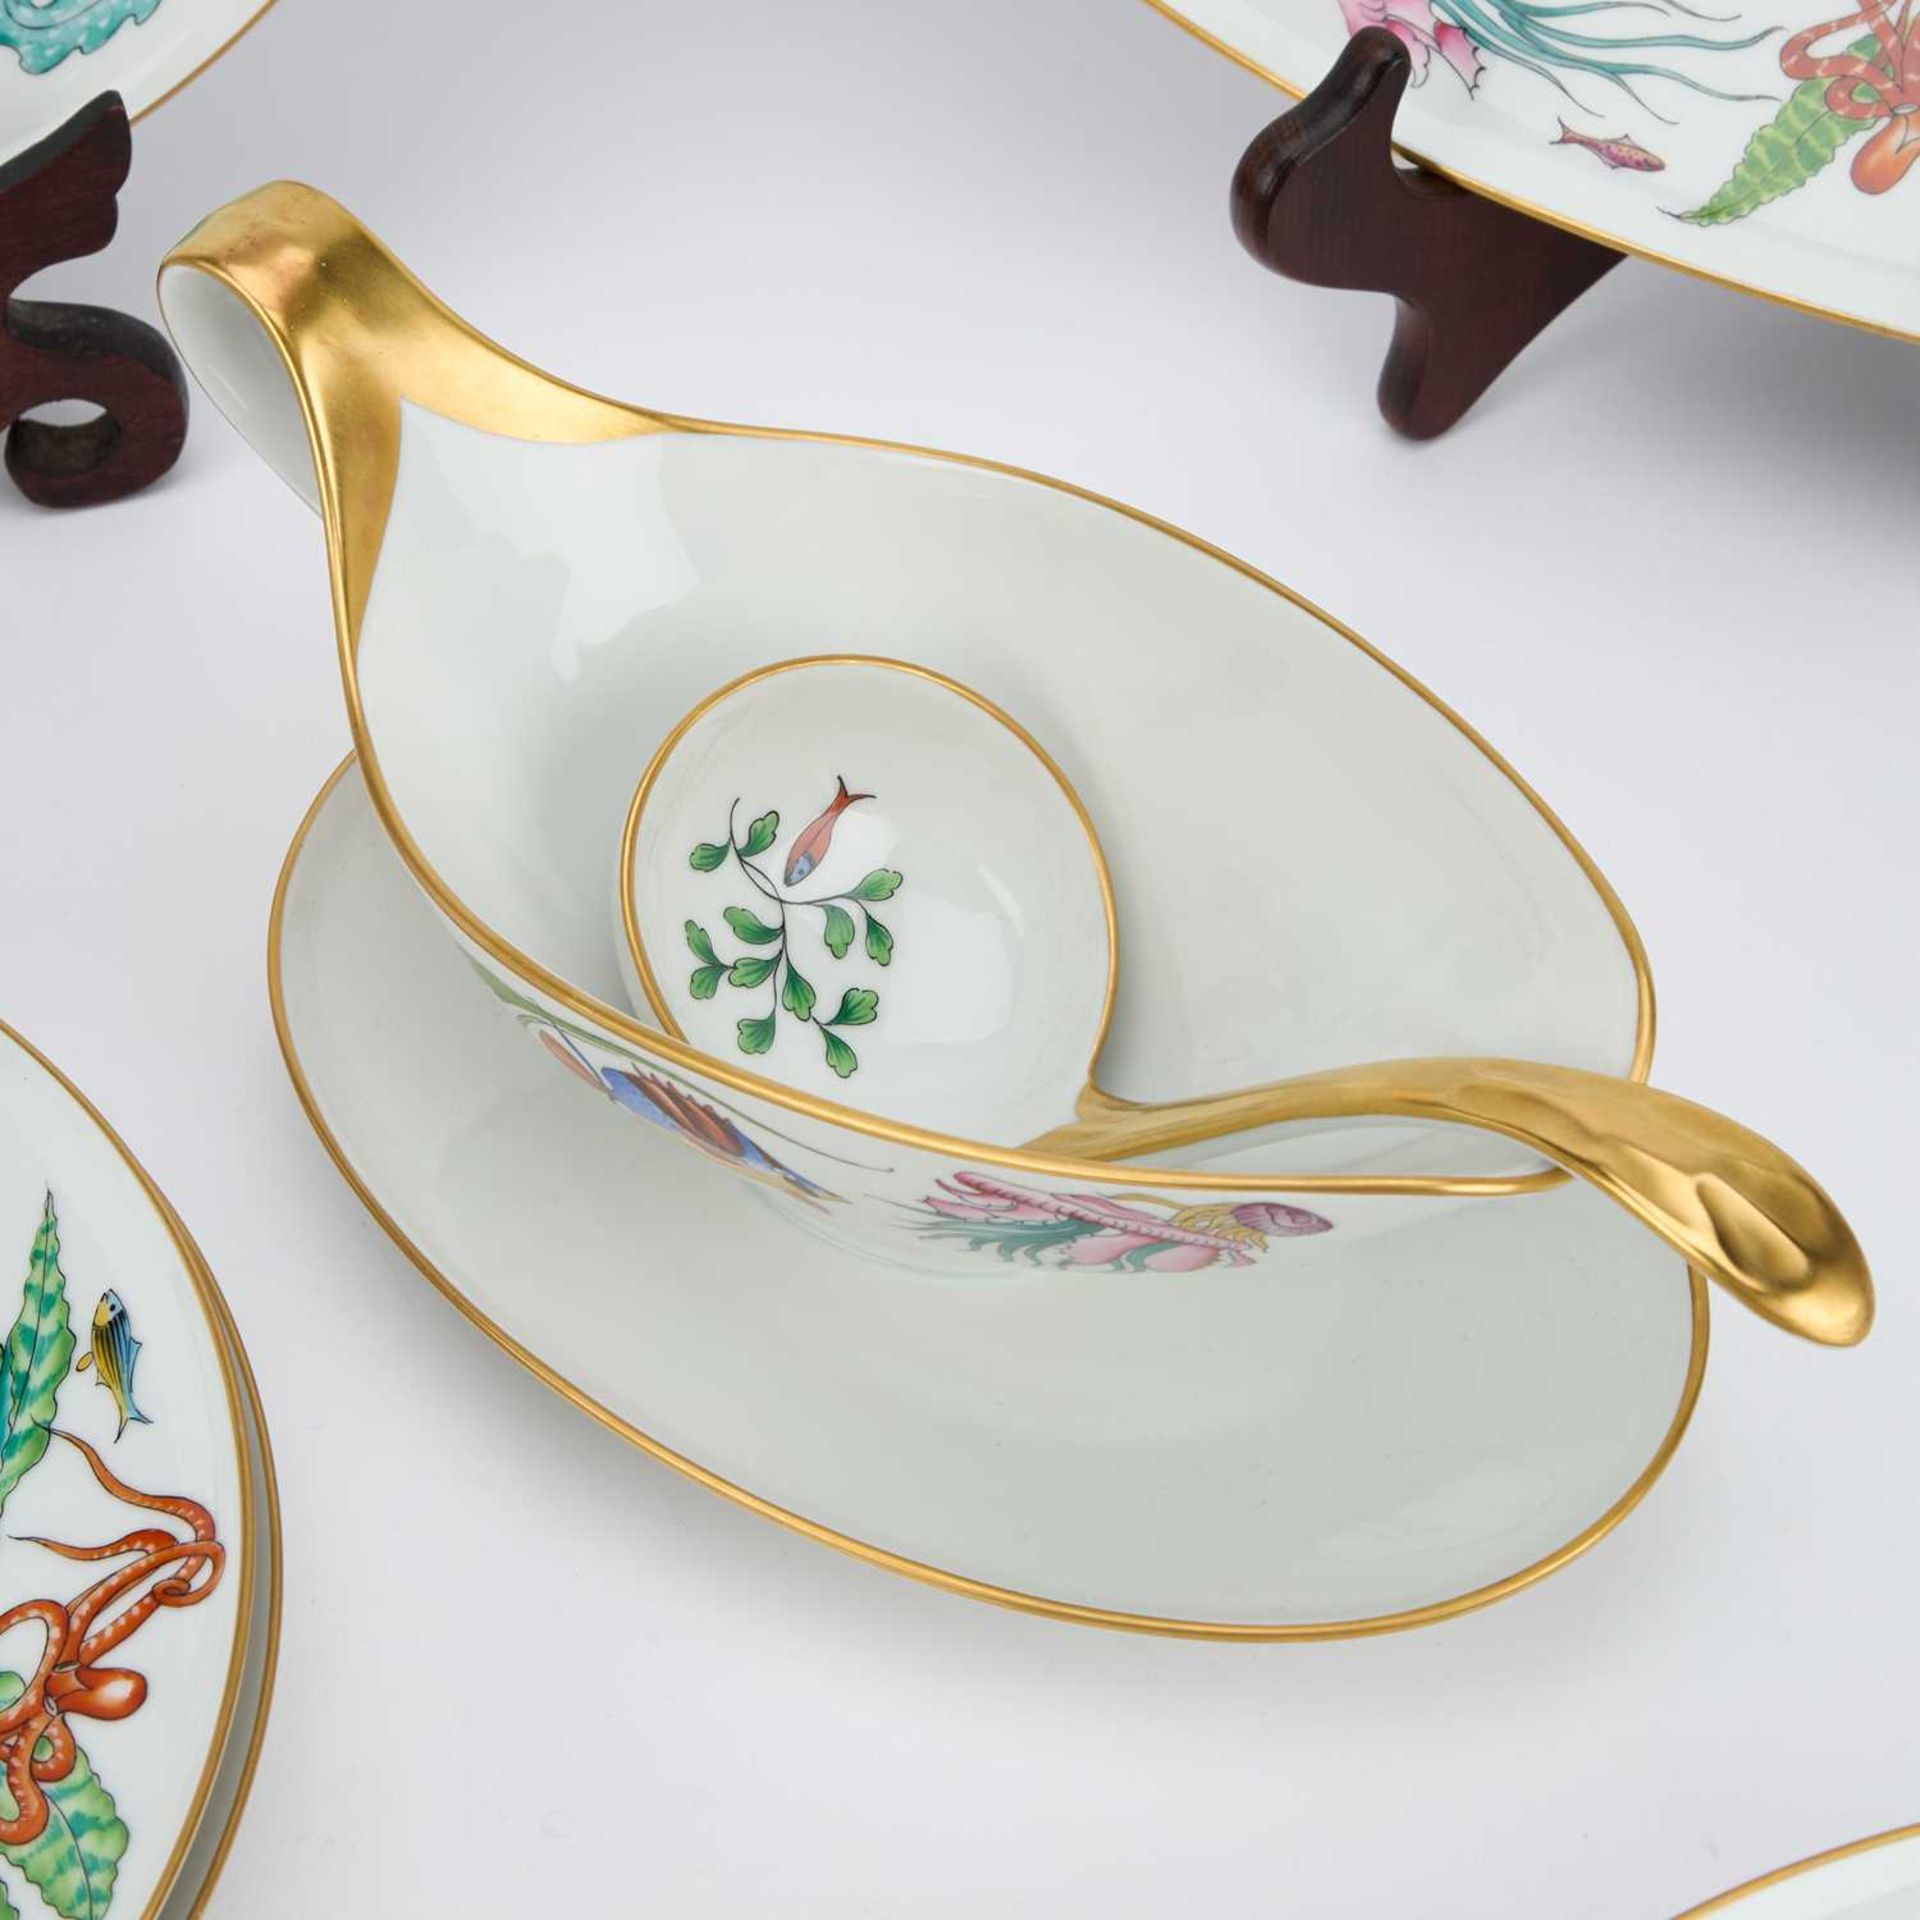 A HEINRICH FISH PATTERN DINNER SERVICE - Image 3 of 8